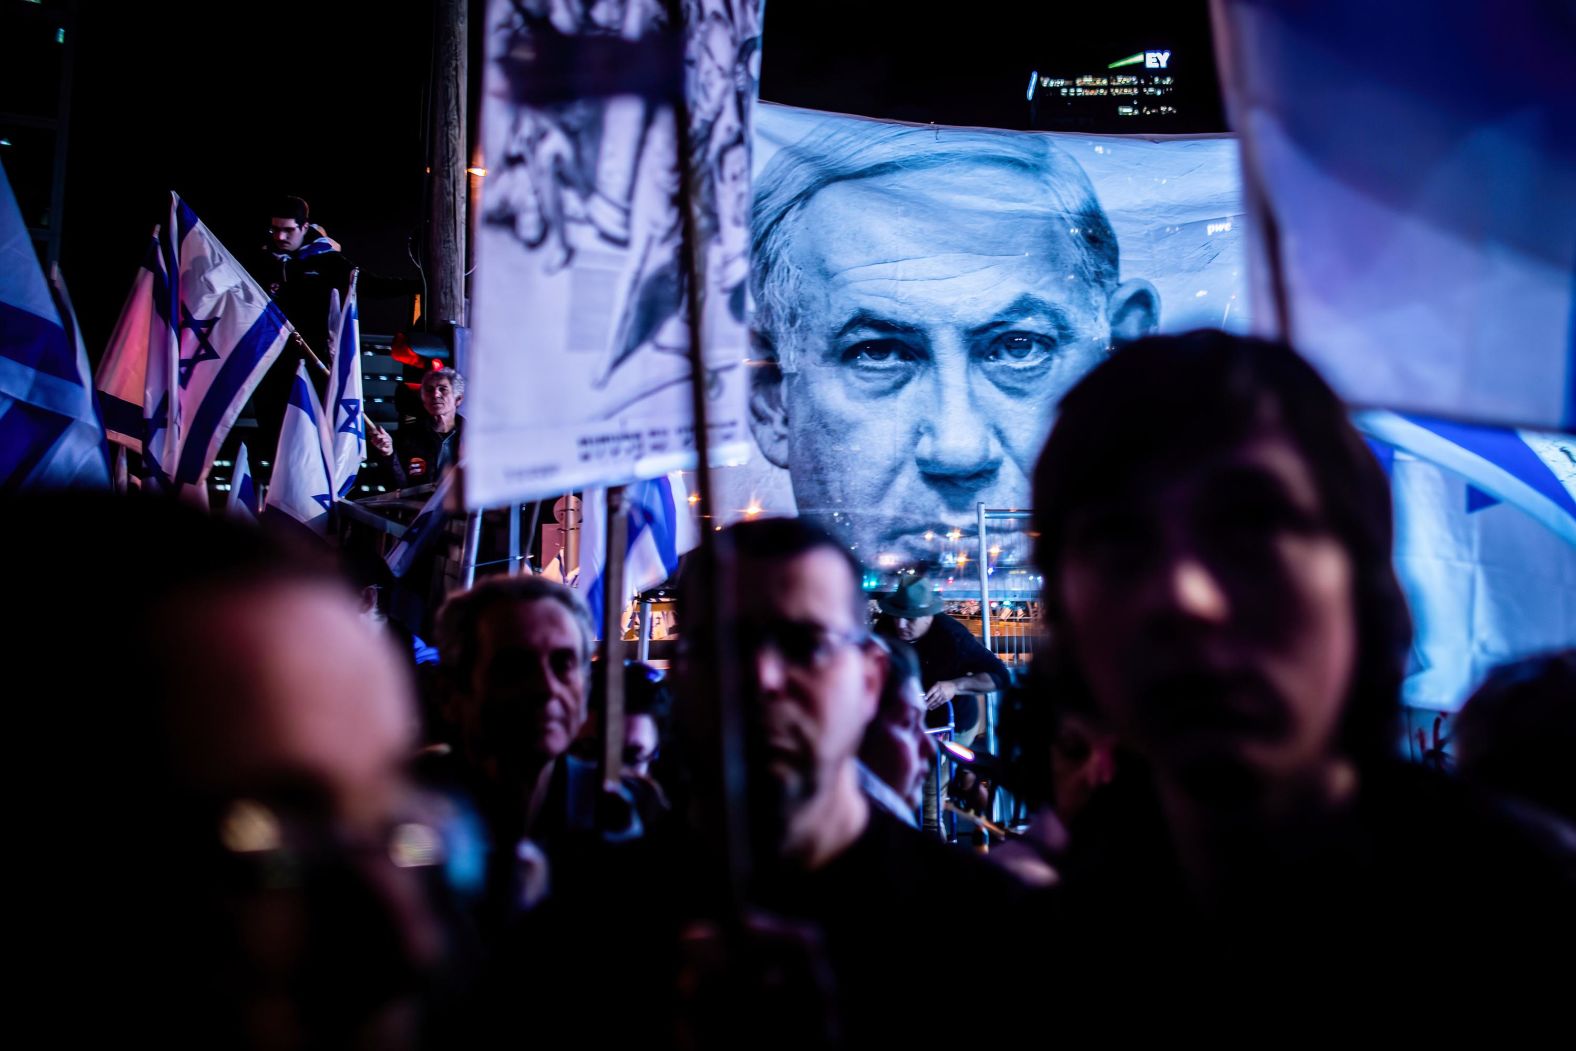 Protesters stand under a photo of Netanyahu during a demonstration in Tel Aviv, Israel, in April 2023. For months, Israelis have been taking to the streets to <a href="http://www.cnn.com/2023/07/24/middleeast/gallery/israel-judicial-reform-july-protests/index.html" target="_blank">protest proposed changes to the country's legal system</a>.